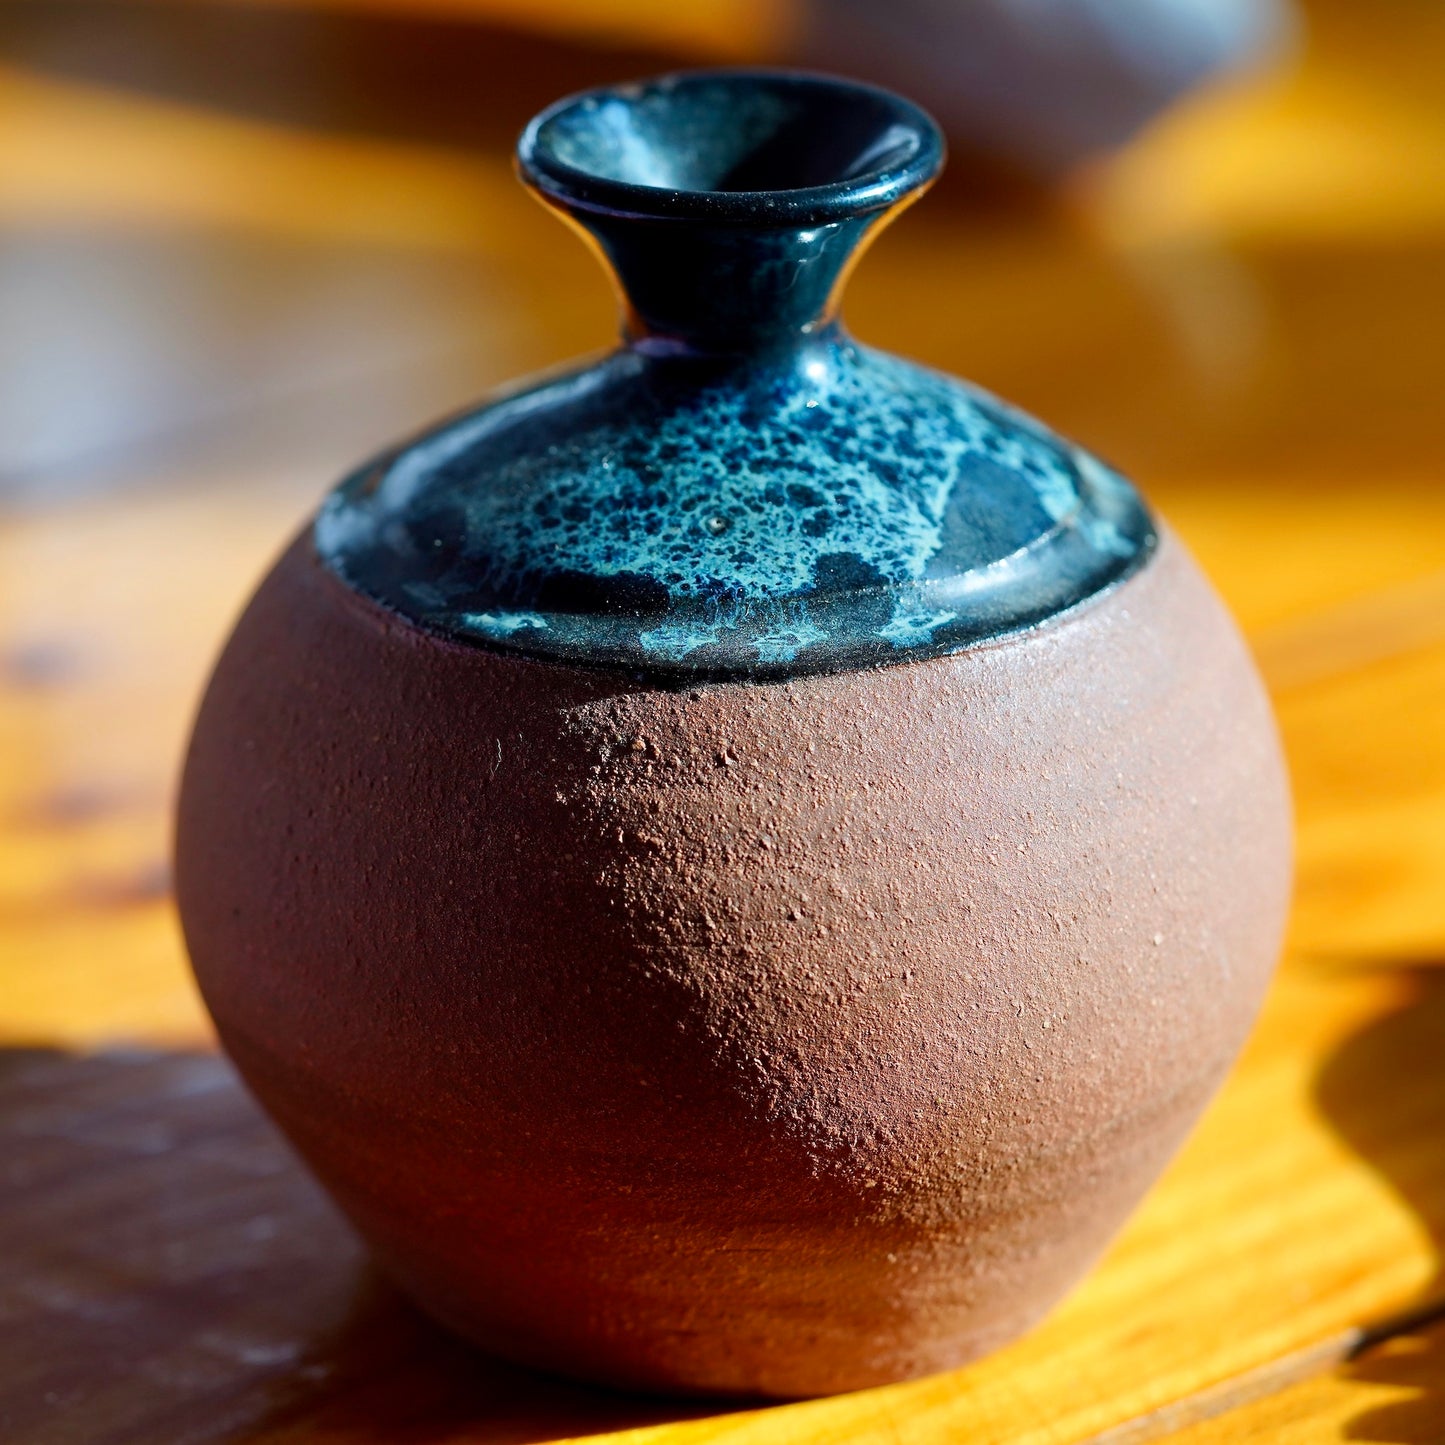 Load image into Gallery viewer, Handmade brown clay ceramic bud vase with black, blue and white nebula glaze on top, displayed on a light wood floor
